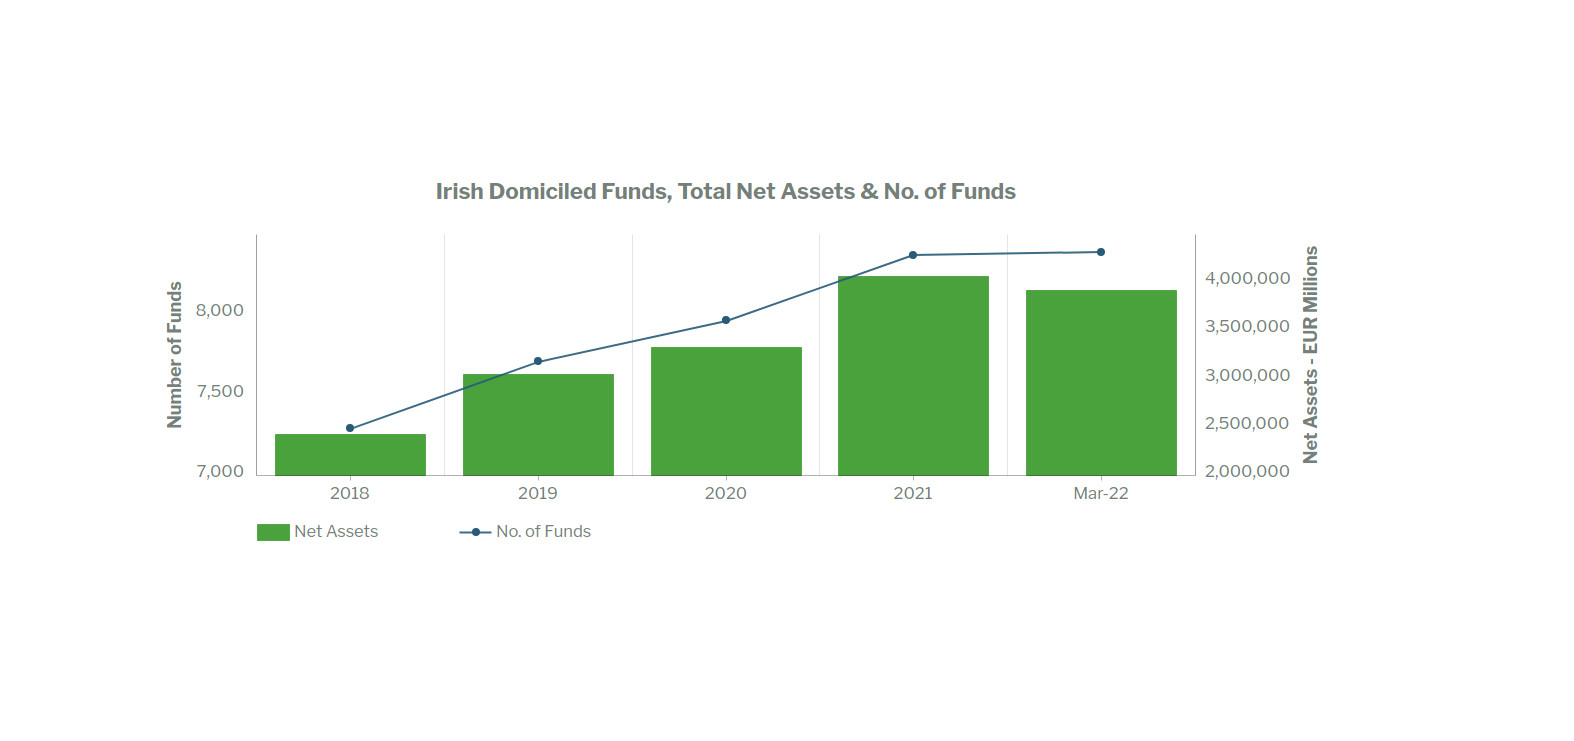 Ireland increasingly becoming the 'go-to' funds jurisdiction globally